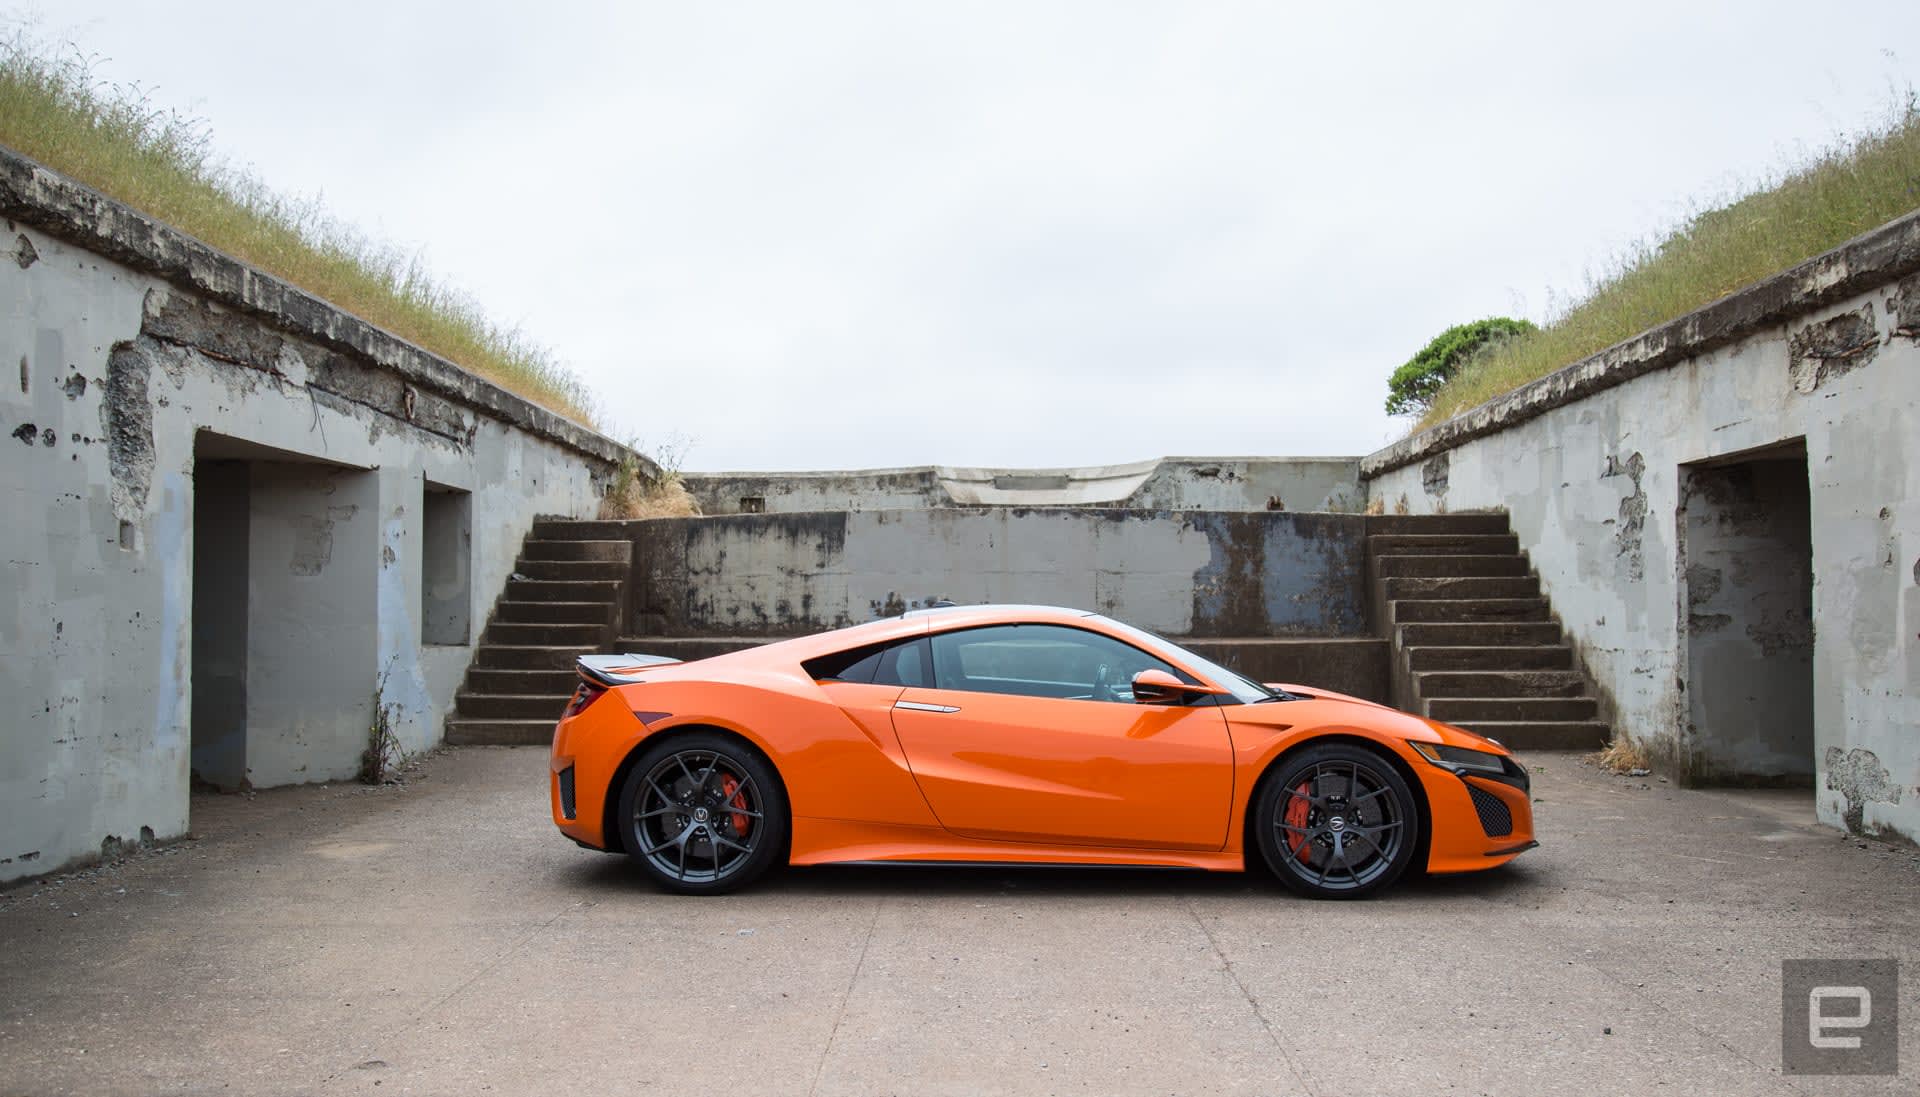 The 2019 Acura Nsx Is A Supercar Built For Everyday Auto